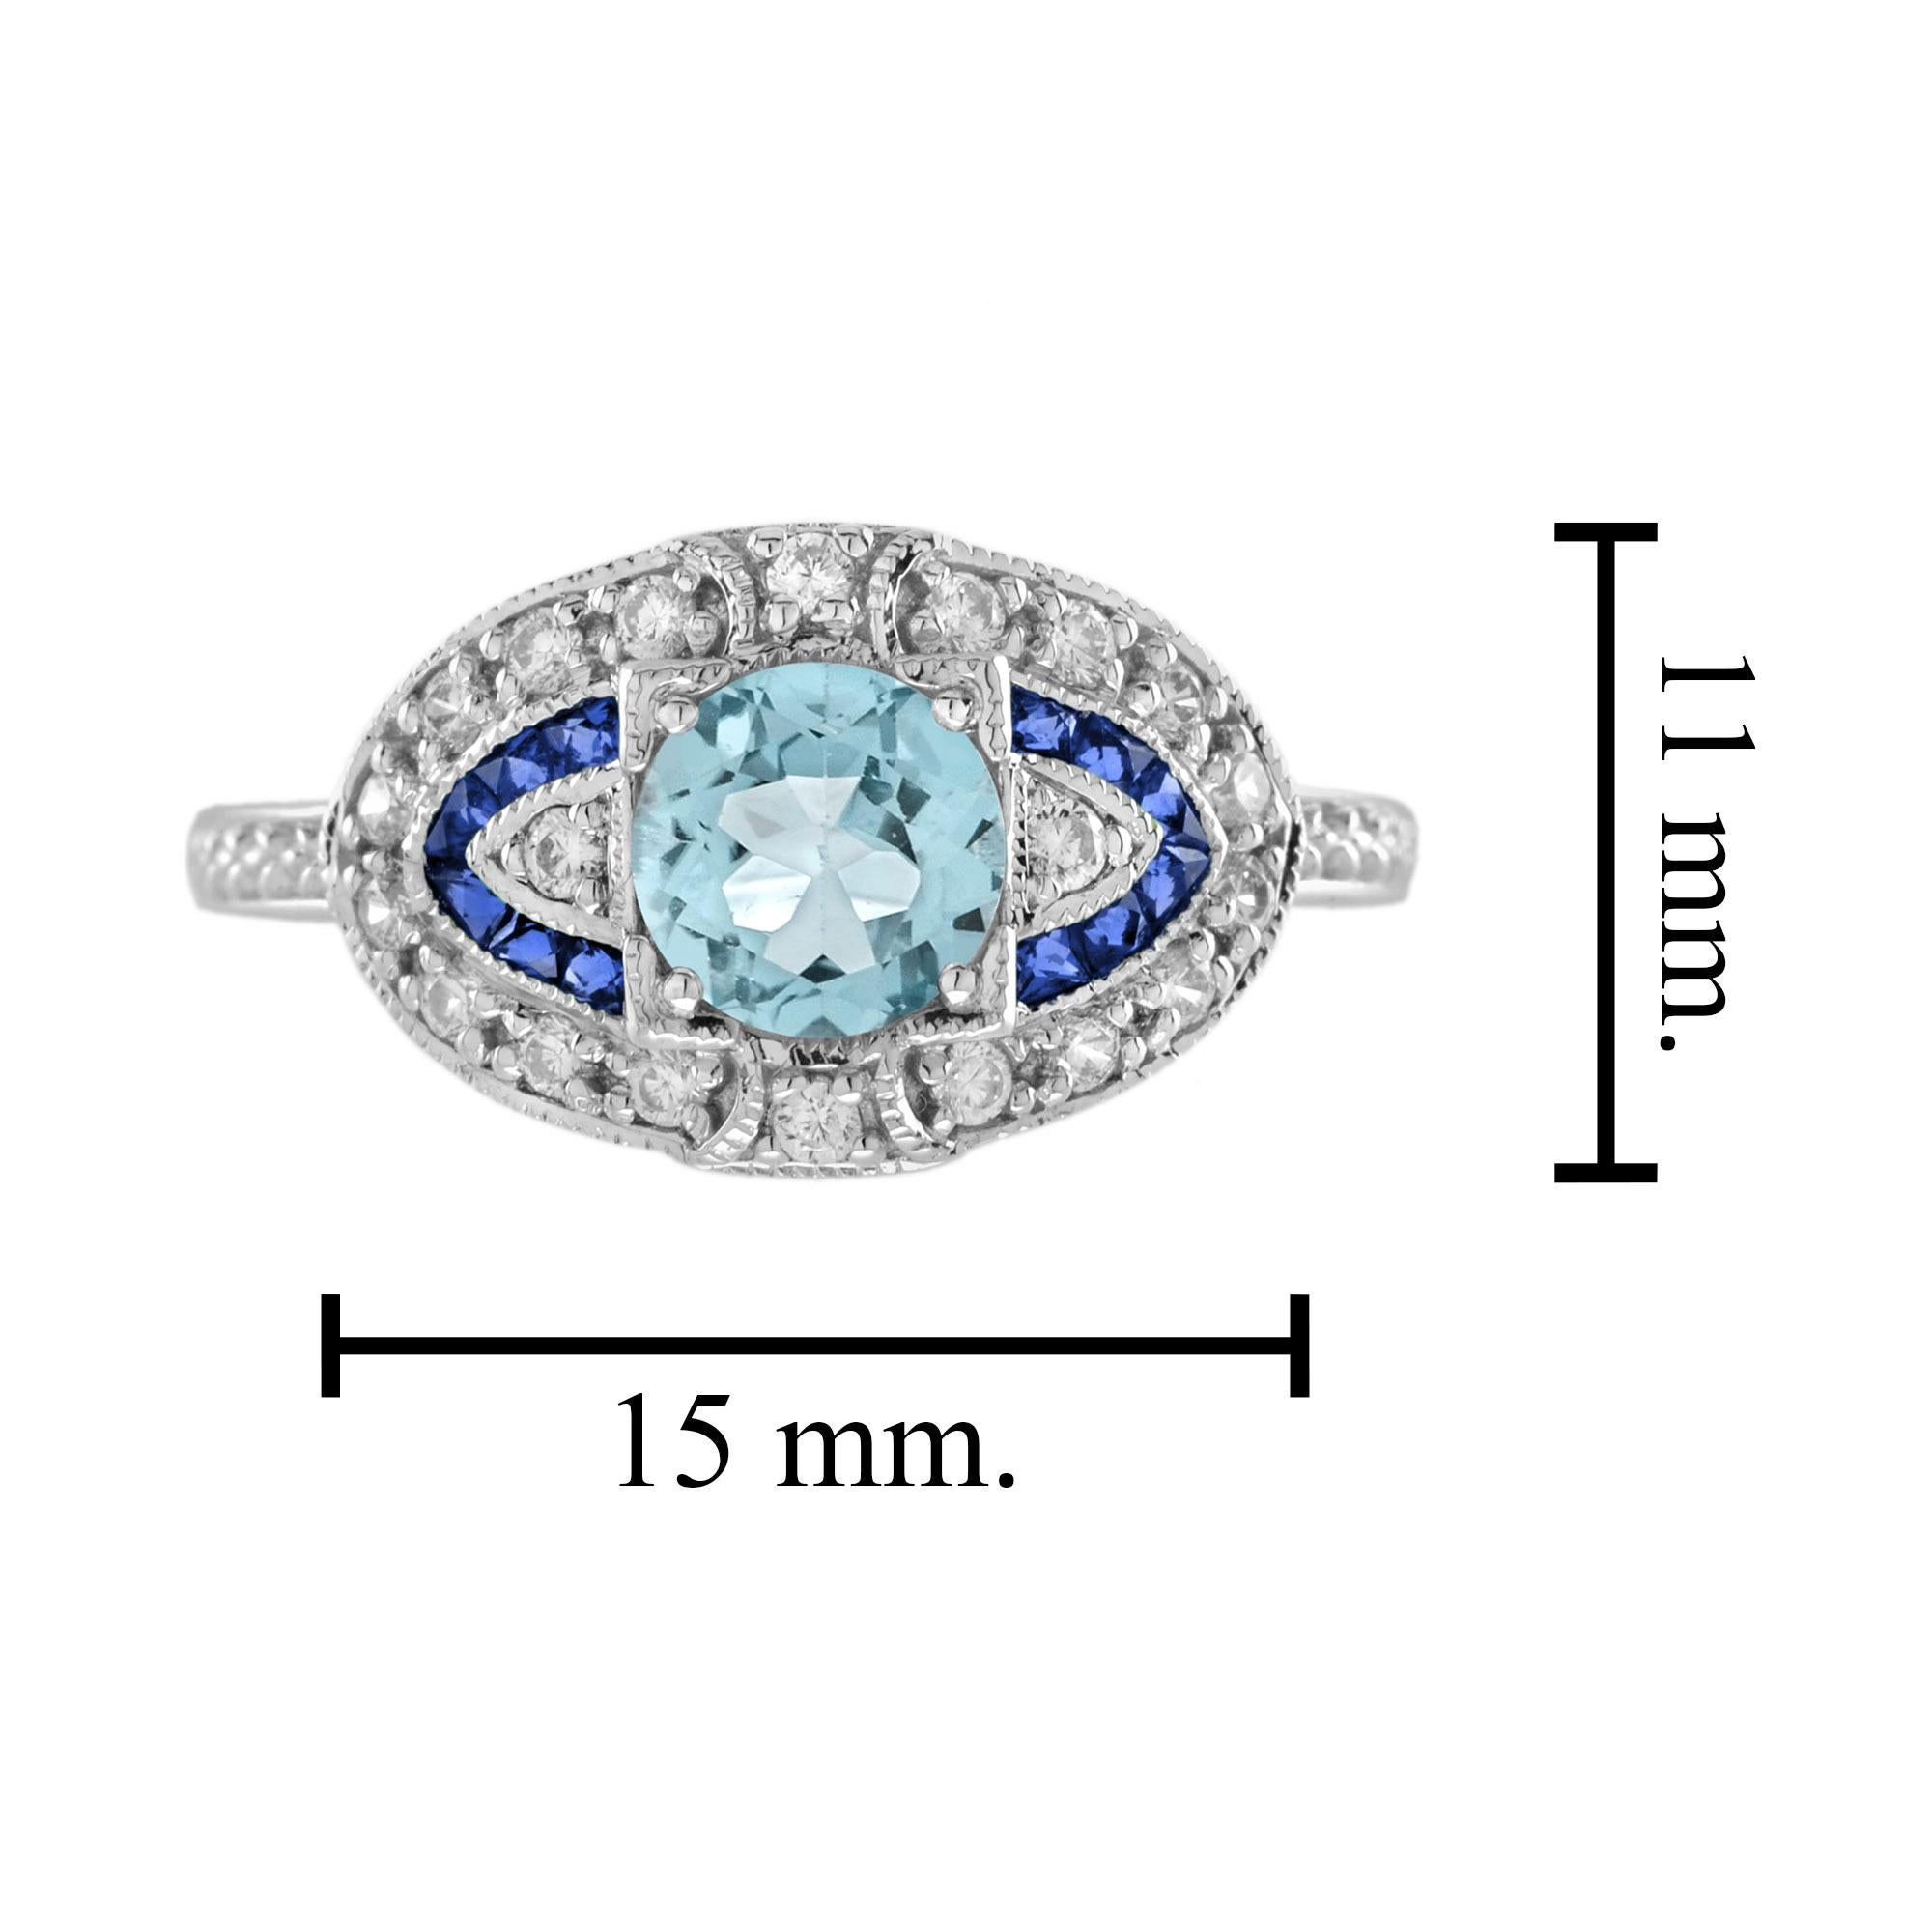 Aquamarine Sapphire Diamond Art Deco Style Engagement Ring in 18k White Gold For Sale 1